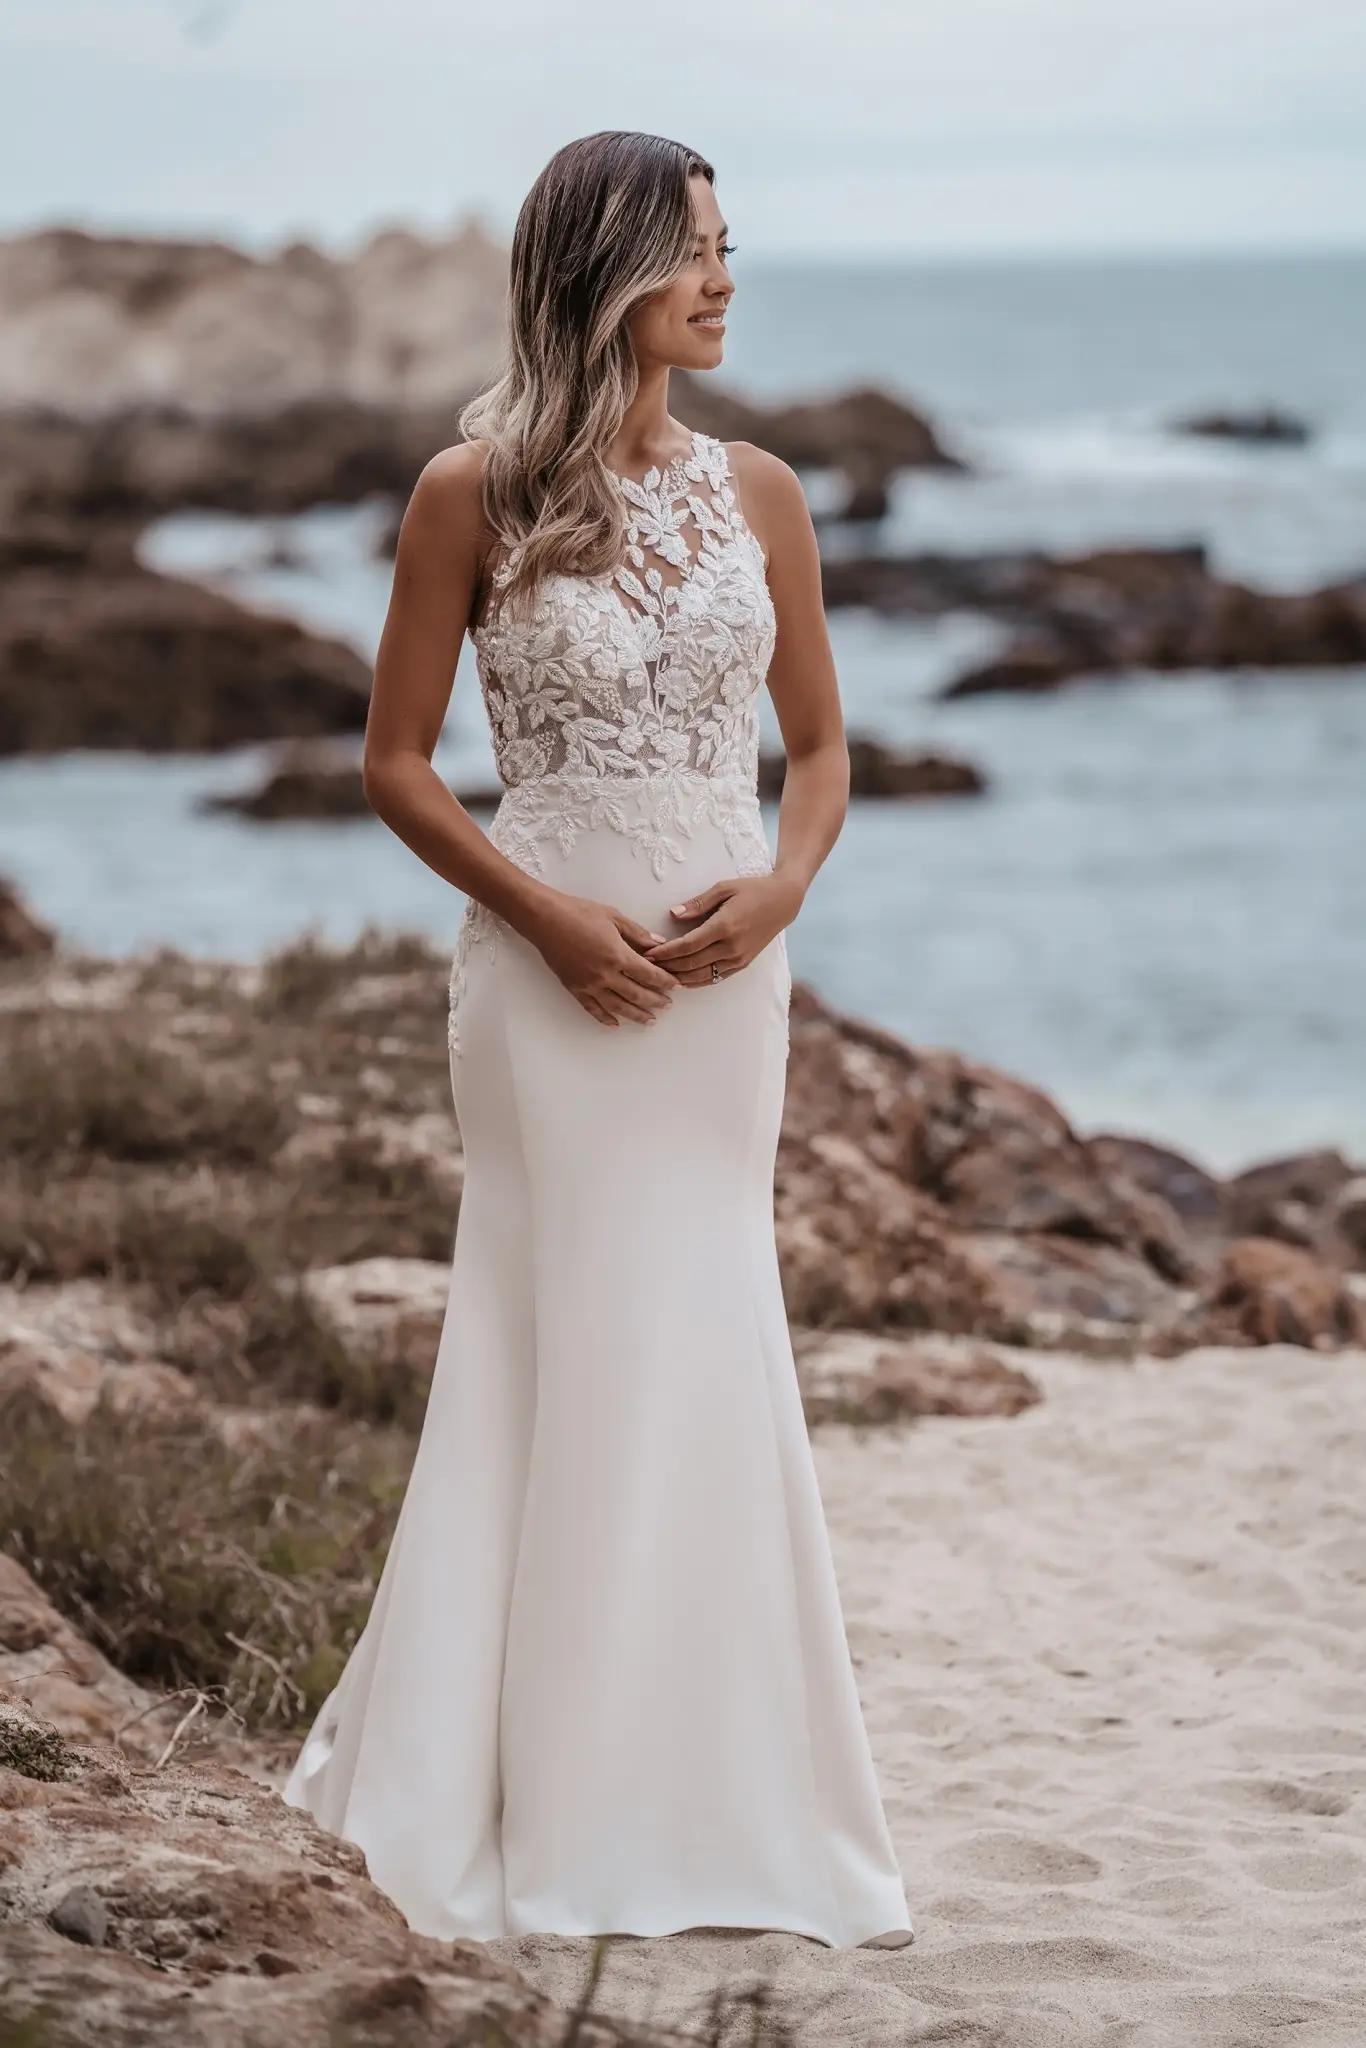 2024 Bridal Gown Trends: Styles, Fabrics, and Necklines Image